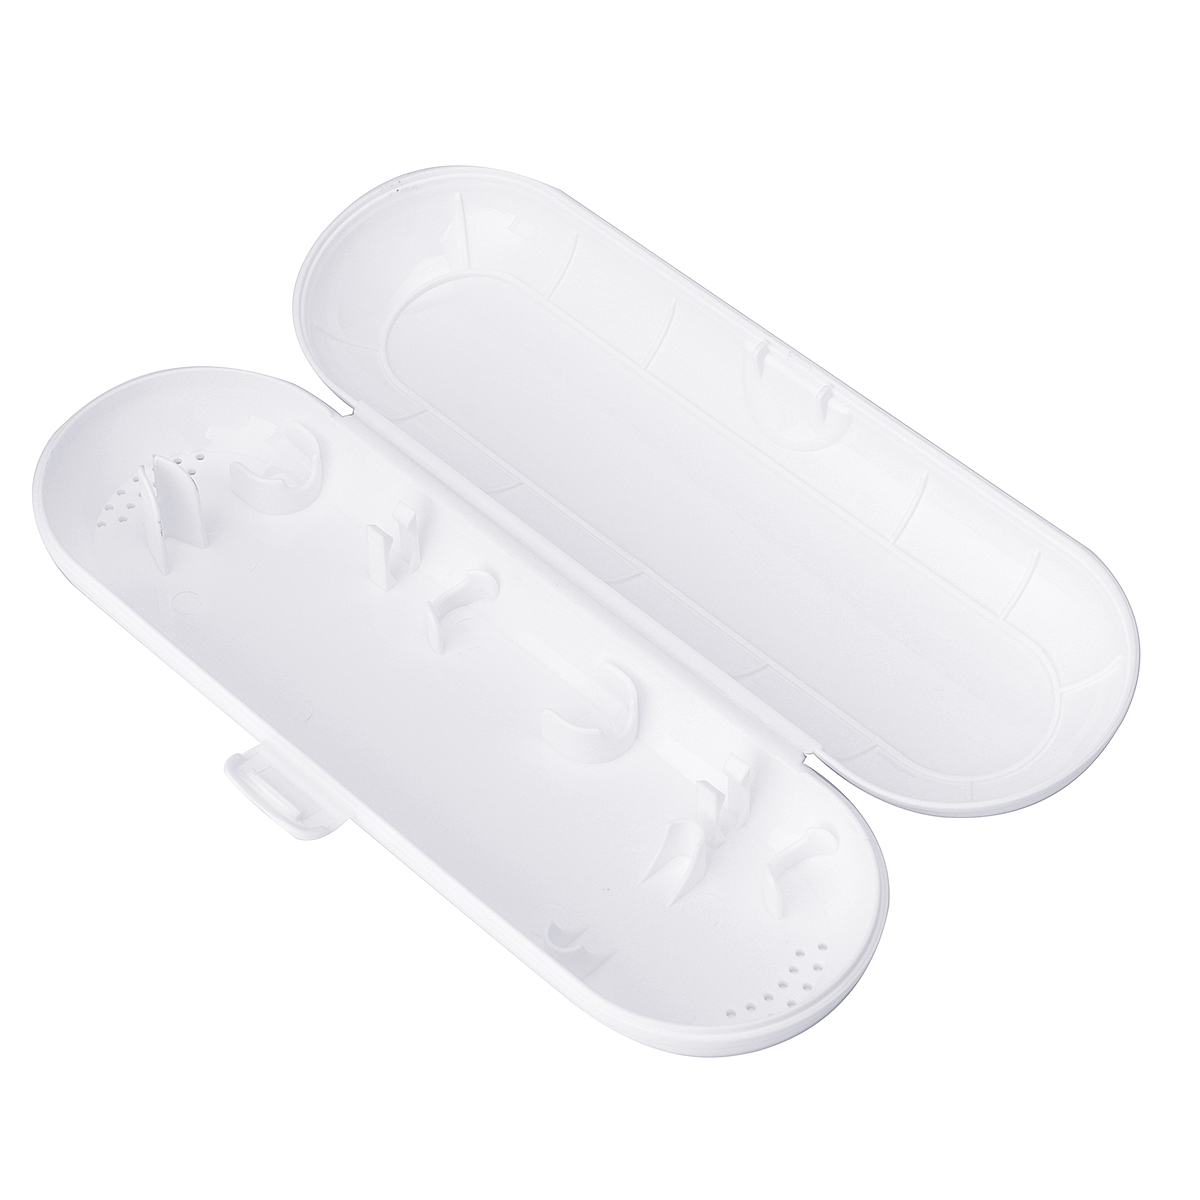 Original-Environment-Friendly-PVC-SOOCARE-Electric-Toothbrush-Holder-Case-WHITE-For-SOOCARE-SOOCAS-X-1361687-5